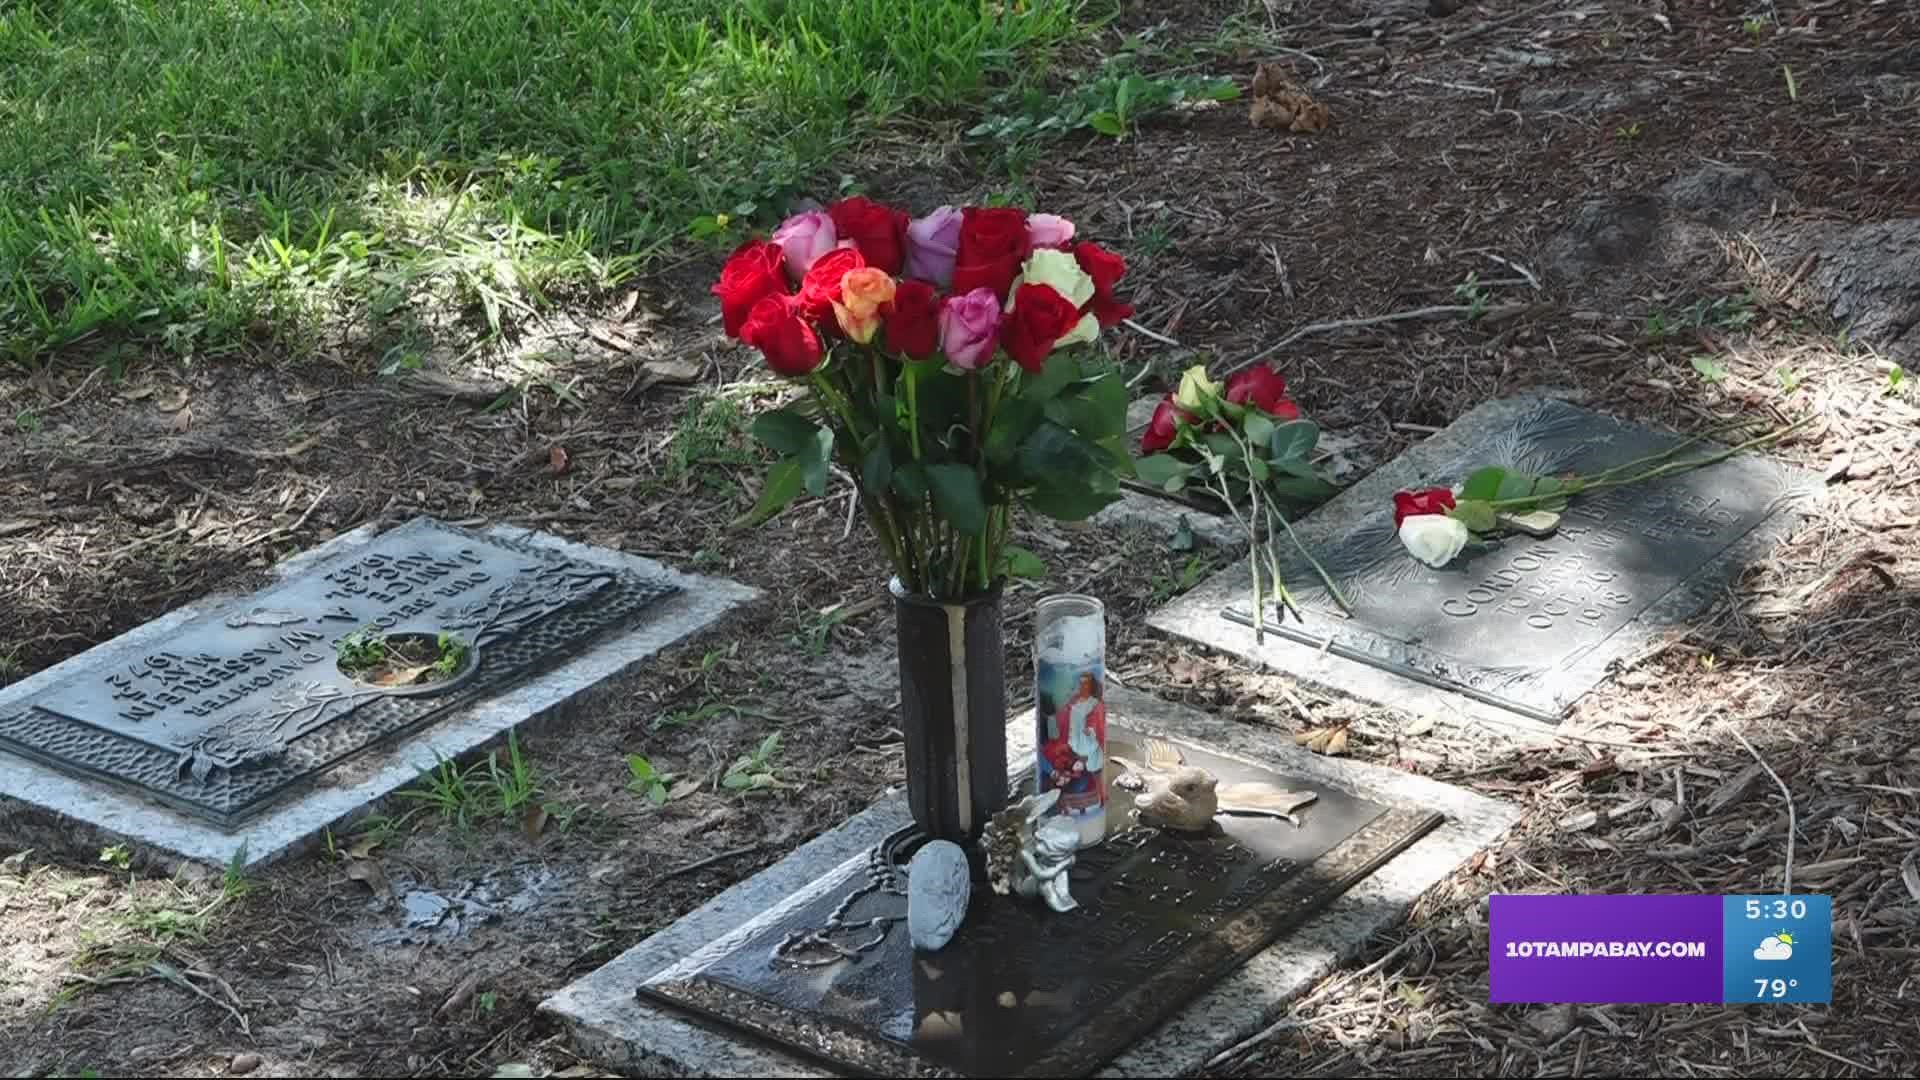 The removal of the vases resulted in a loss of around $150,000, the Pinellas County Sheriff's Office said.